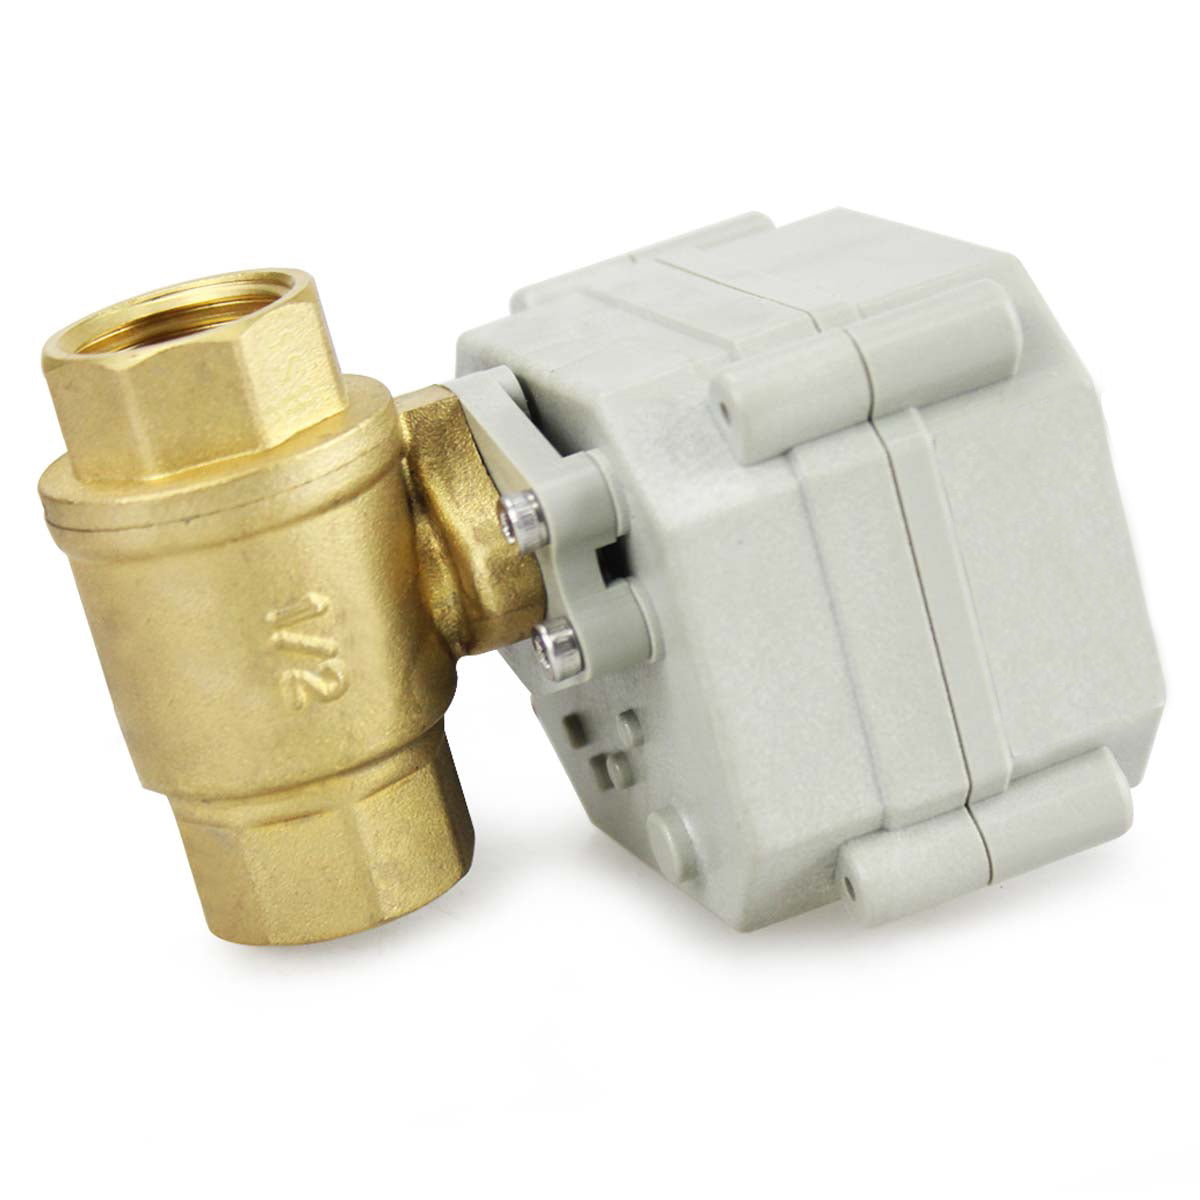 DN15 G1/2 Brass 3 Way Motorized Ball Electrical Valve for Air Conditioner DC12V ZYL-YL Motorized Ball Valve 